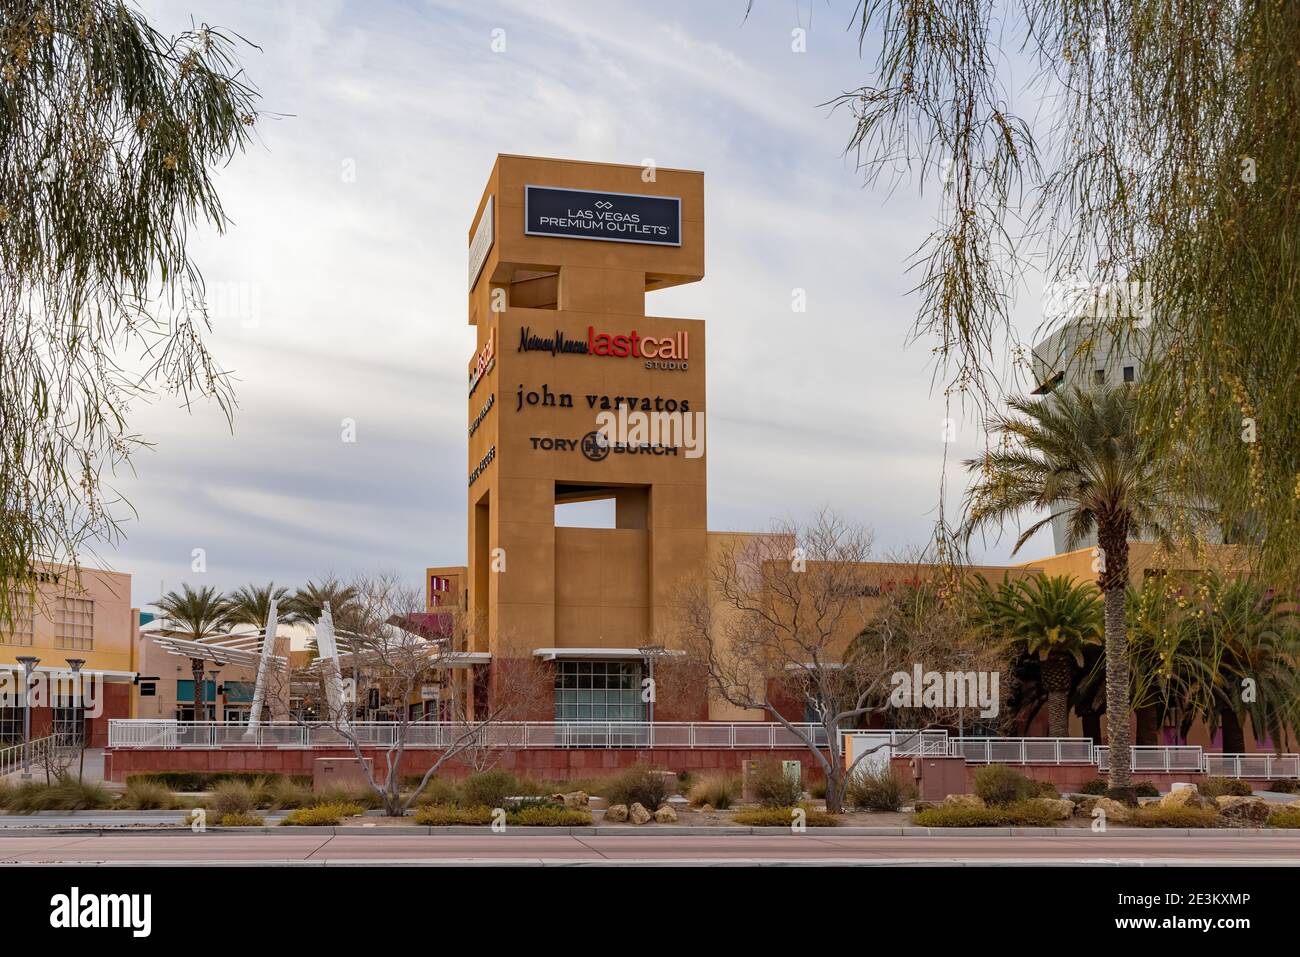 Las vegas north premium outlets hi-res stock photography and images - Alamy